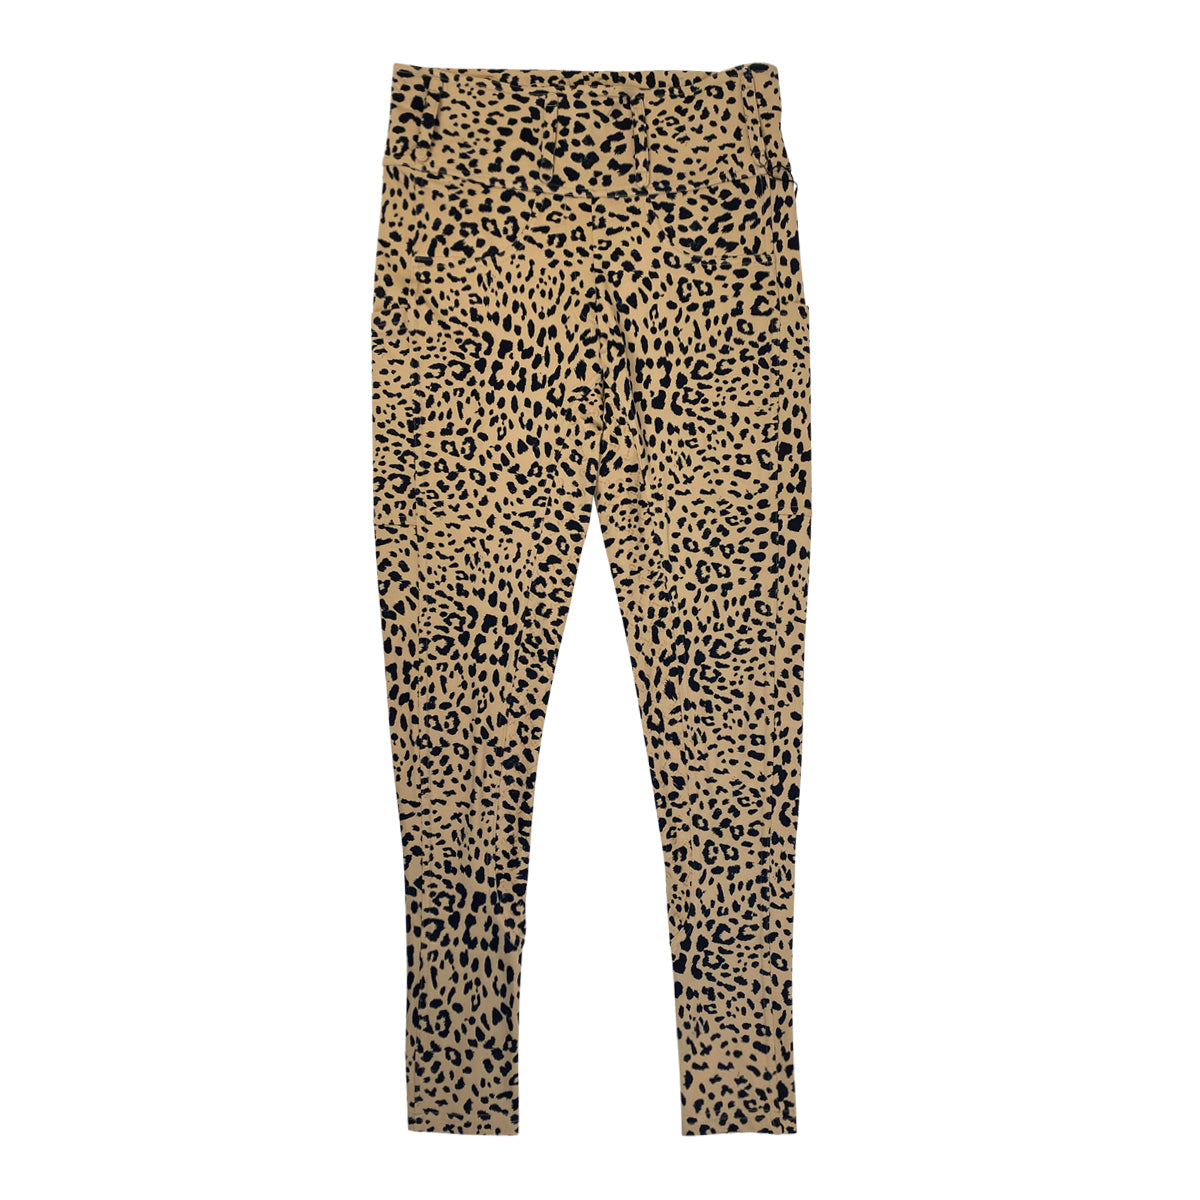 Canter Culture 'Athletic Breech' in Leopard